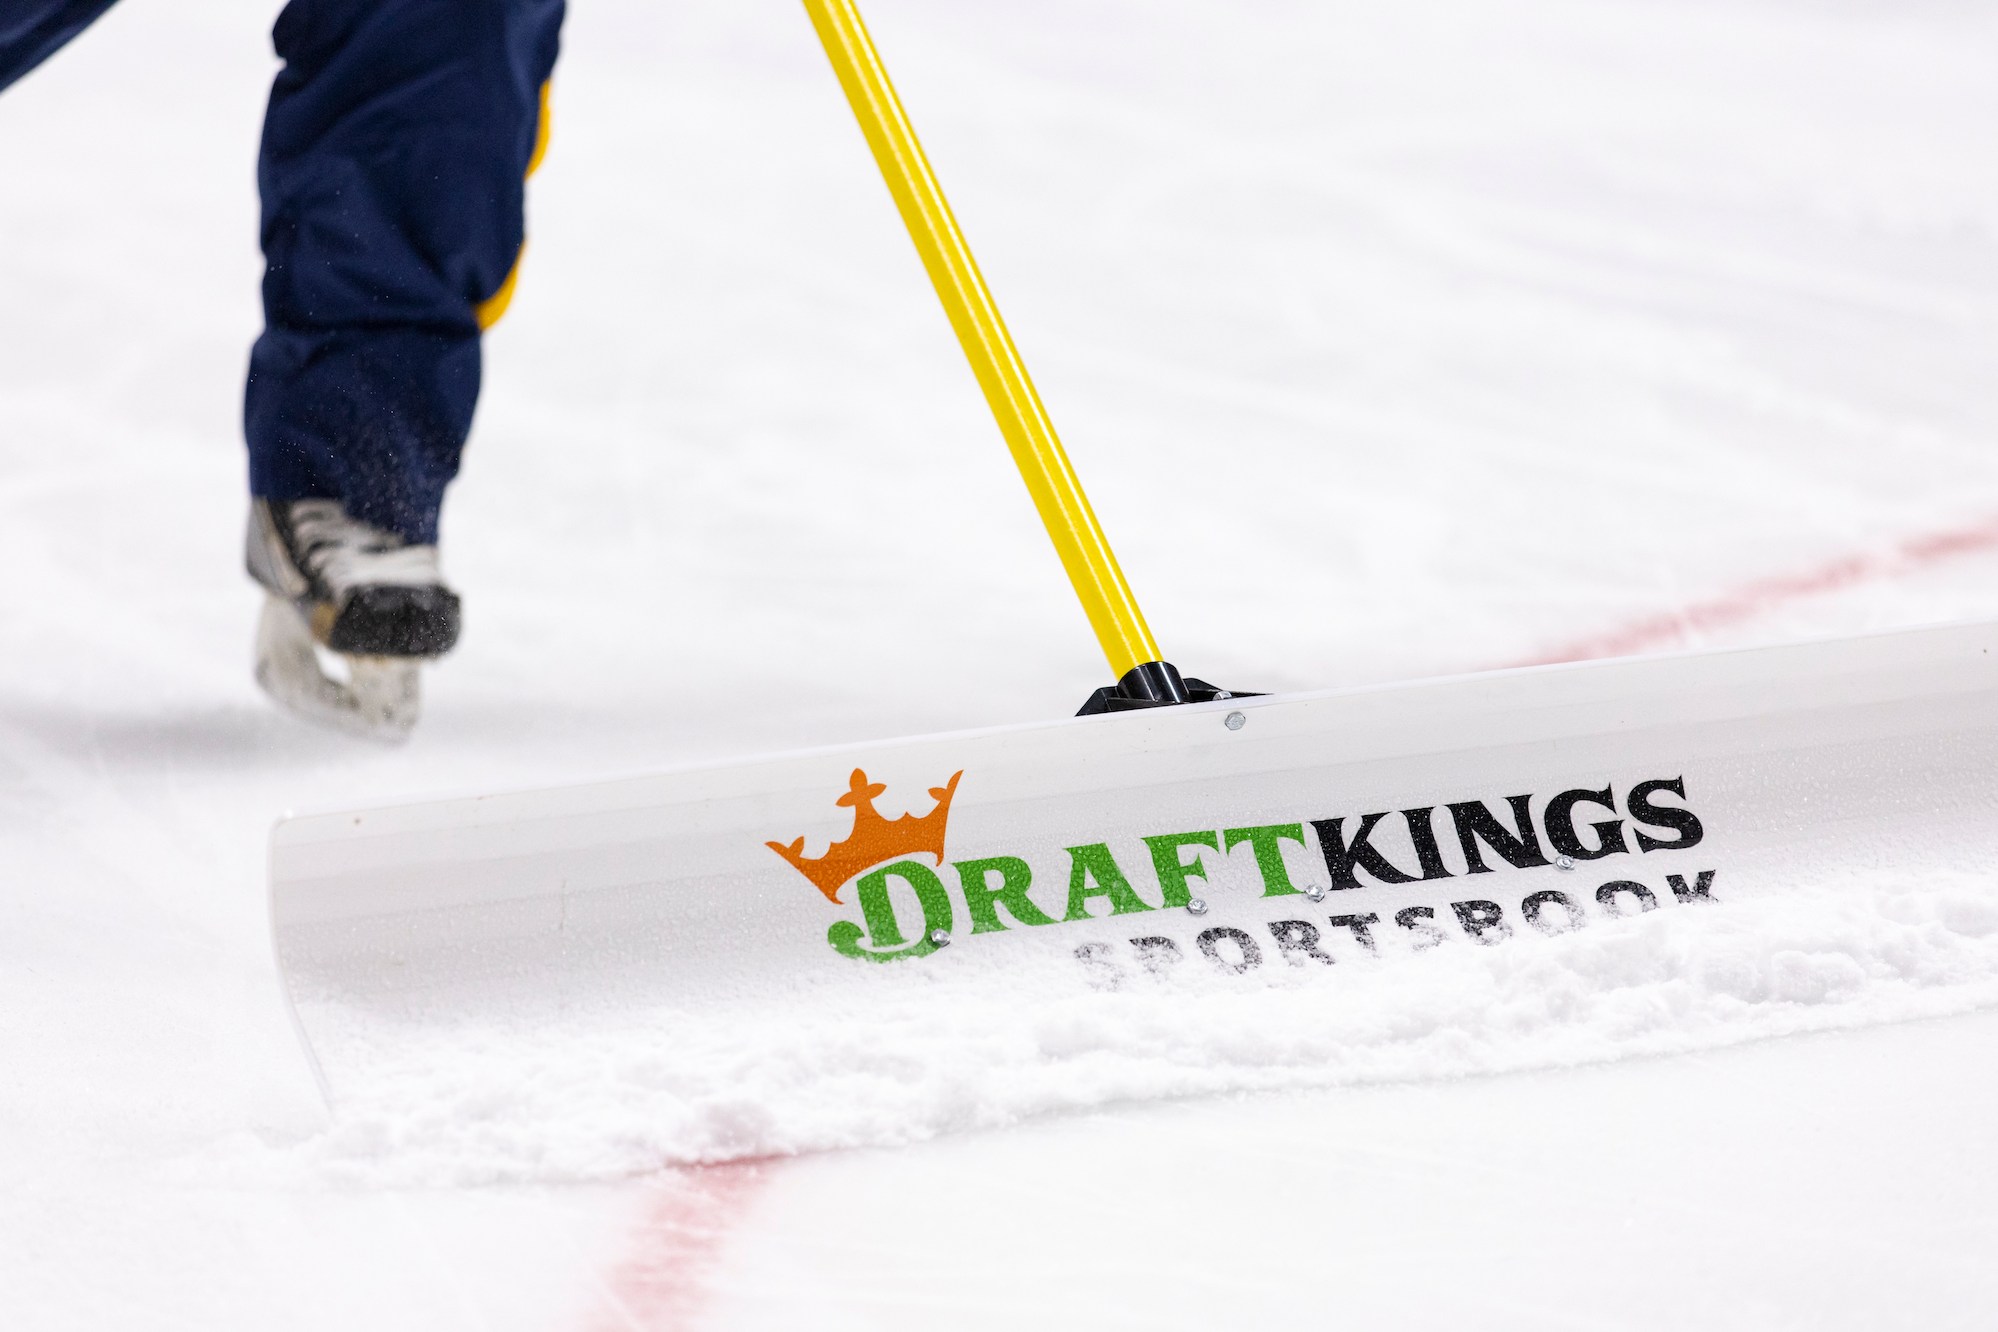 NASHVILLE, TN - OCTOBER 13: Detail view of a DraftKings Sportsbook advertisement during the first period of the NHL game between the Nashville Predators and the Dallas Stars at Bridgestone Arena on October 13, 2022 in Nashville, Tennessee. (Photo by Brett Carlsen/Getty Images)